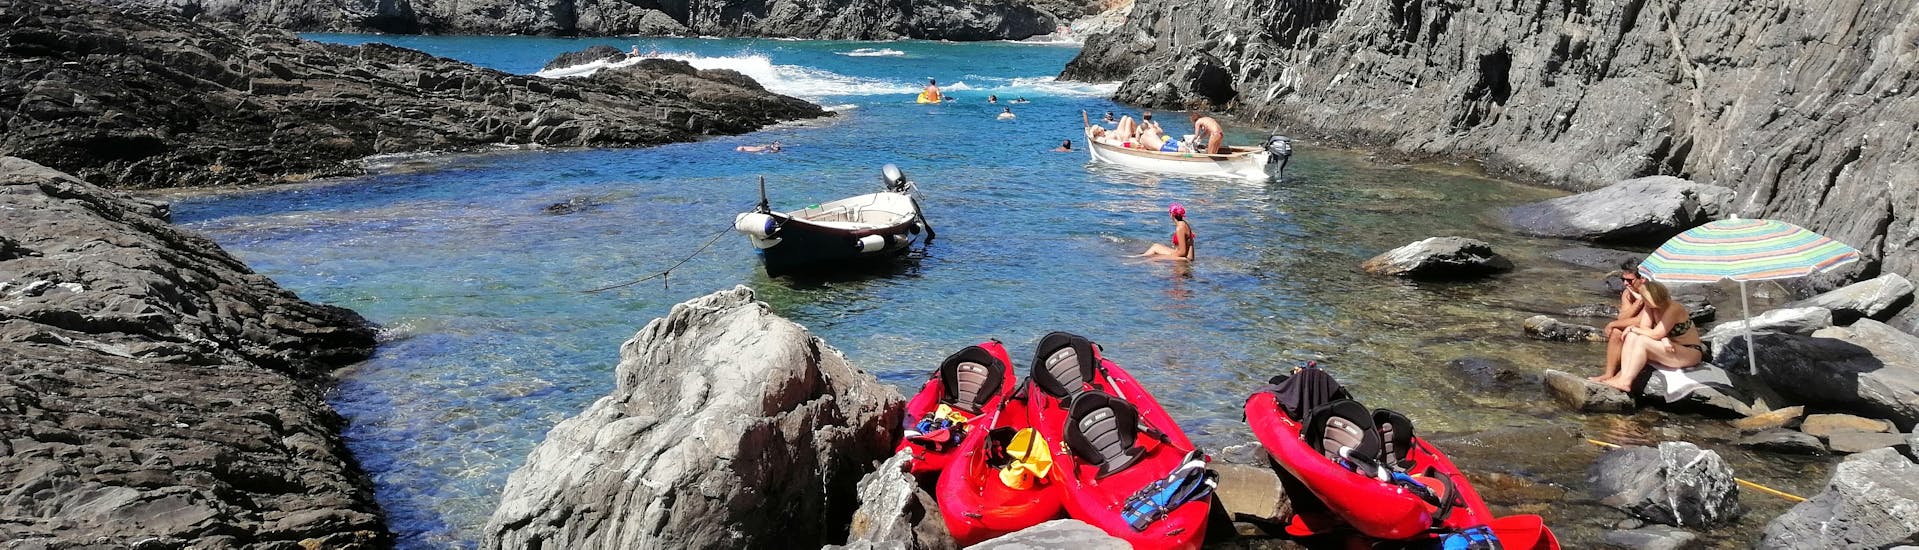 The kayaks are left on the side while everyone is exploring the rocking area during the Kayak Tour in Monterosso - Happy Hour with Carnassa Cinque Terre Kayak Tour.